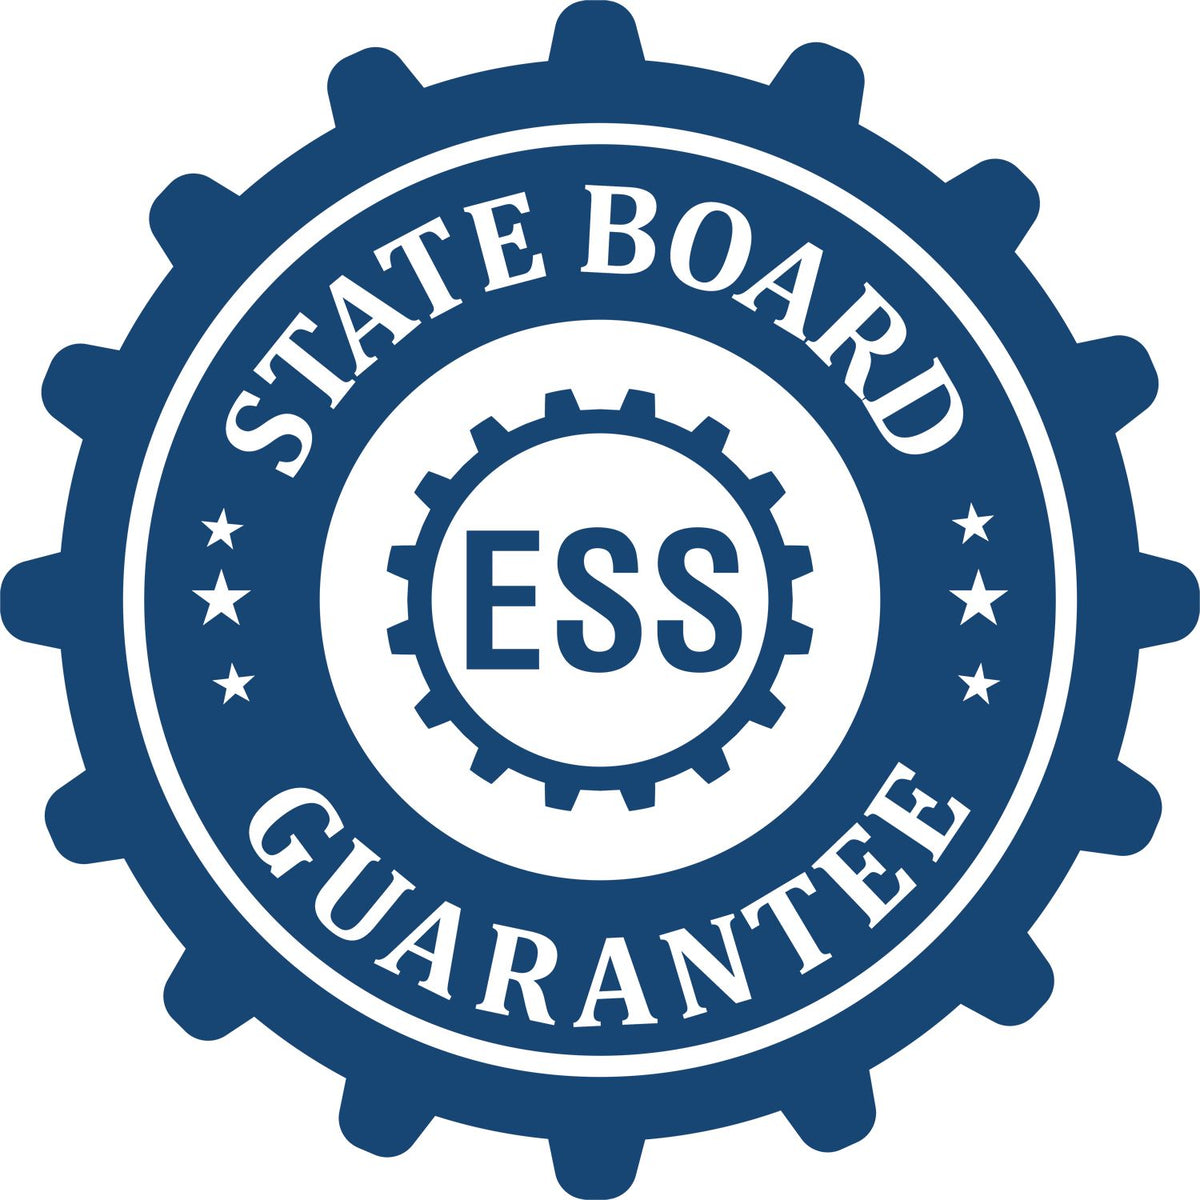 An emblem in a gear shape illustrating a state board guarantee for the Wooden Handle Rhode Island Rectangular Notary Public Stamp product.